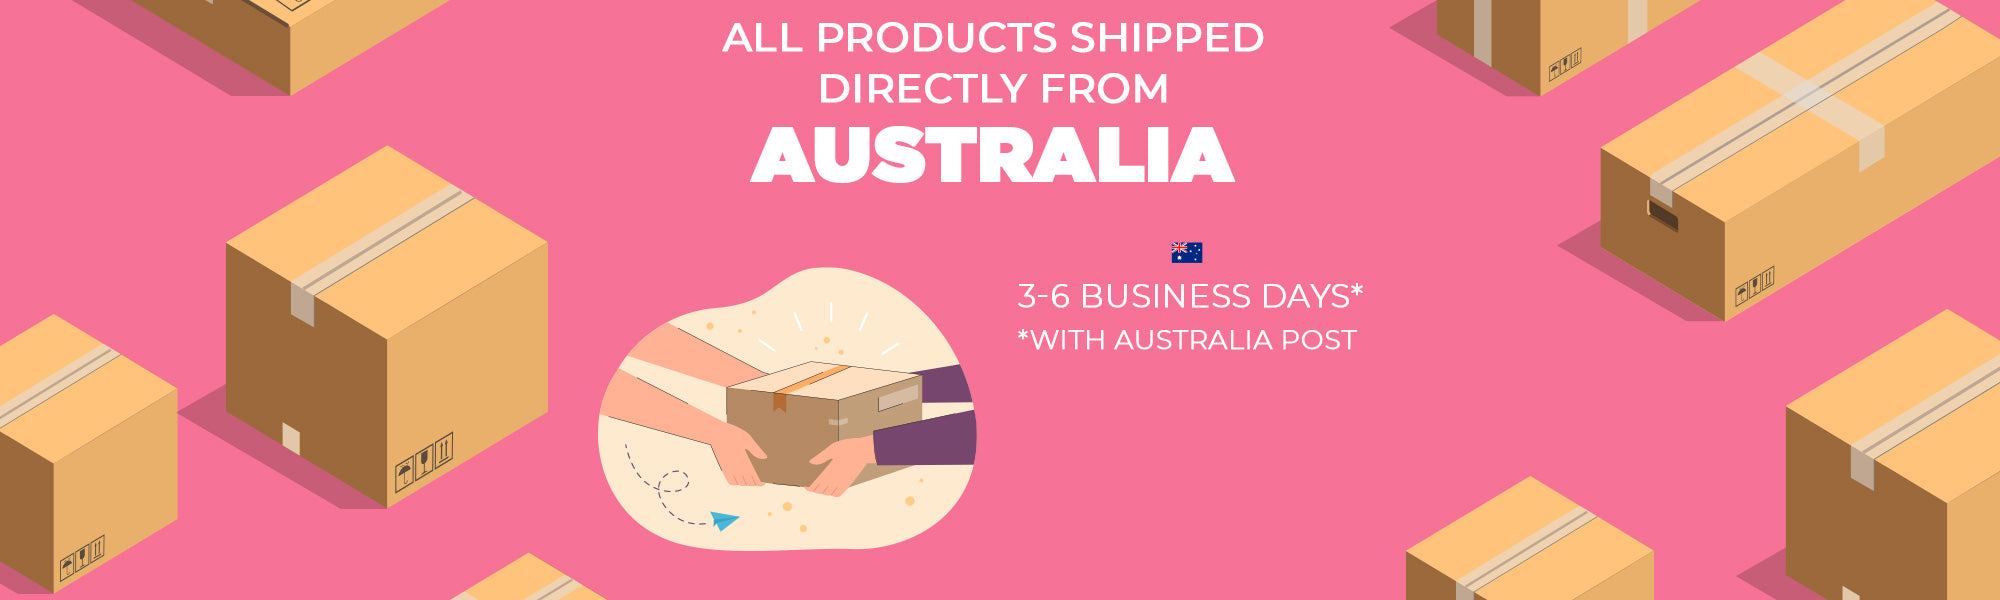 All Products are shipped from Australia